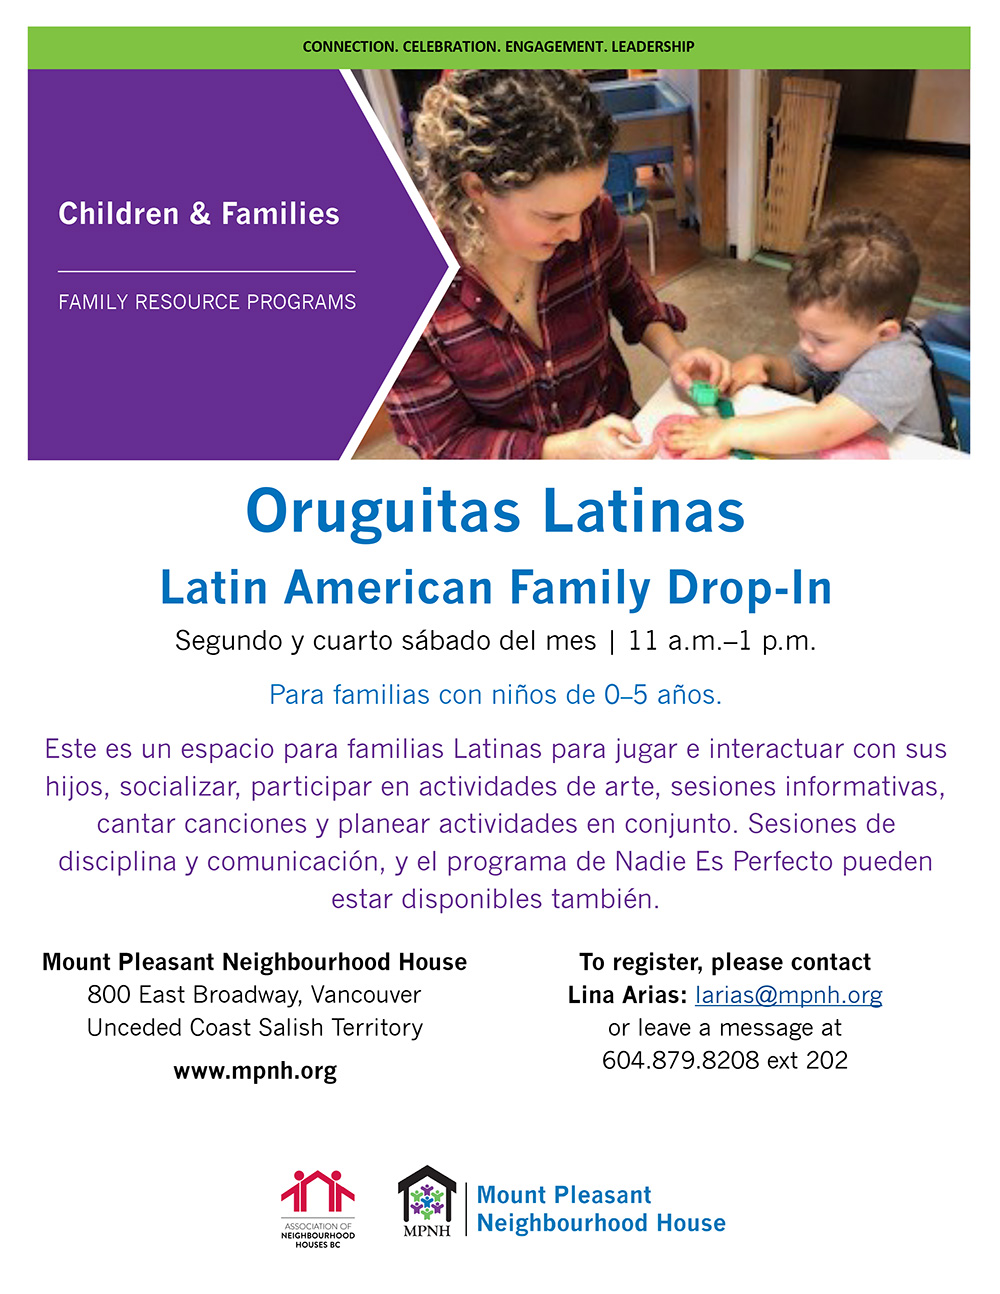 Poster for the Orugitas Latinas Latin American Family Drop-In program showing a woman working on an art project with a young child.